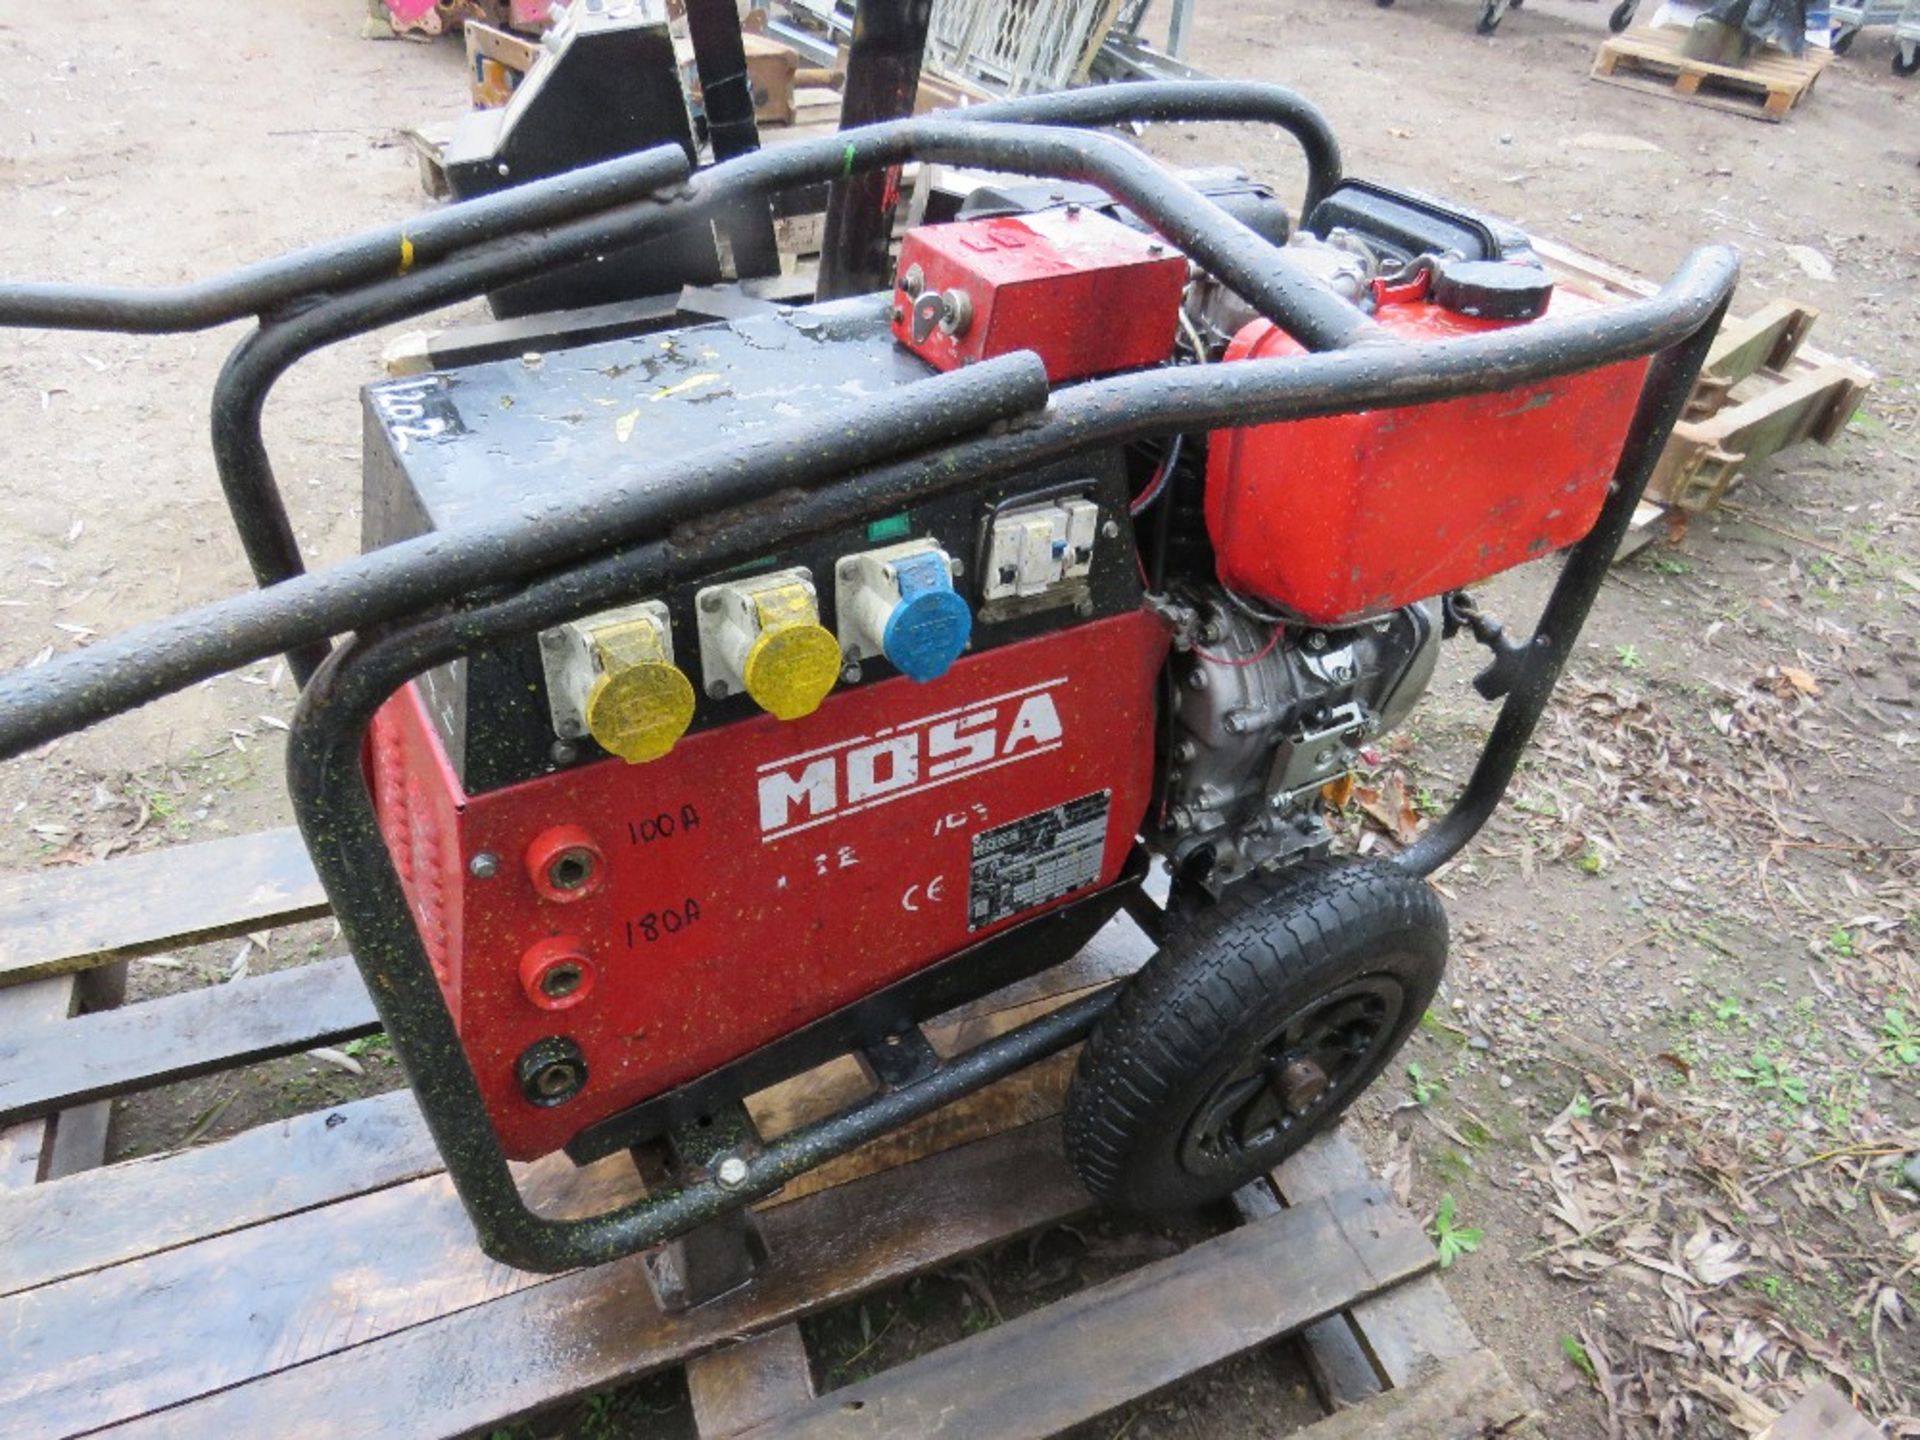 MOSA TS200 DIESEL ENGINED WELDER. WHEN TESTED WAS SEEN TO START AND RUN, OUTPUT UNTESTED. - Image 3 of 5